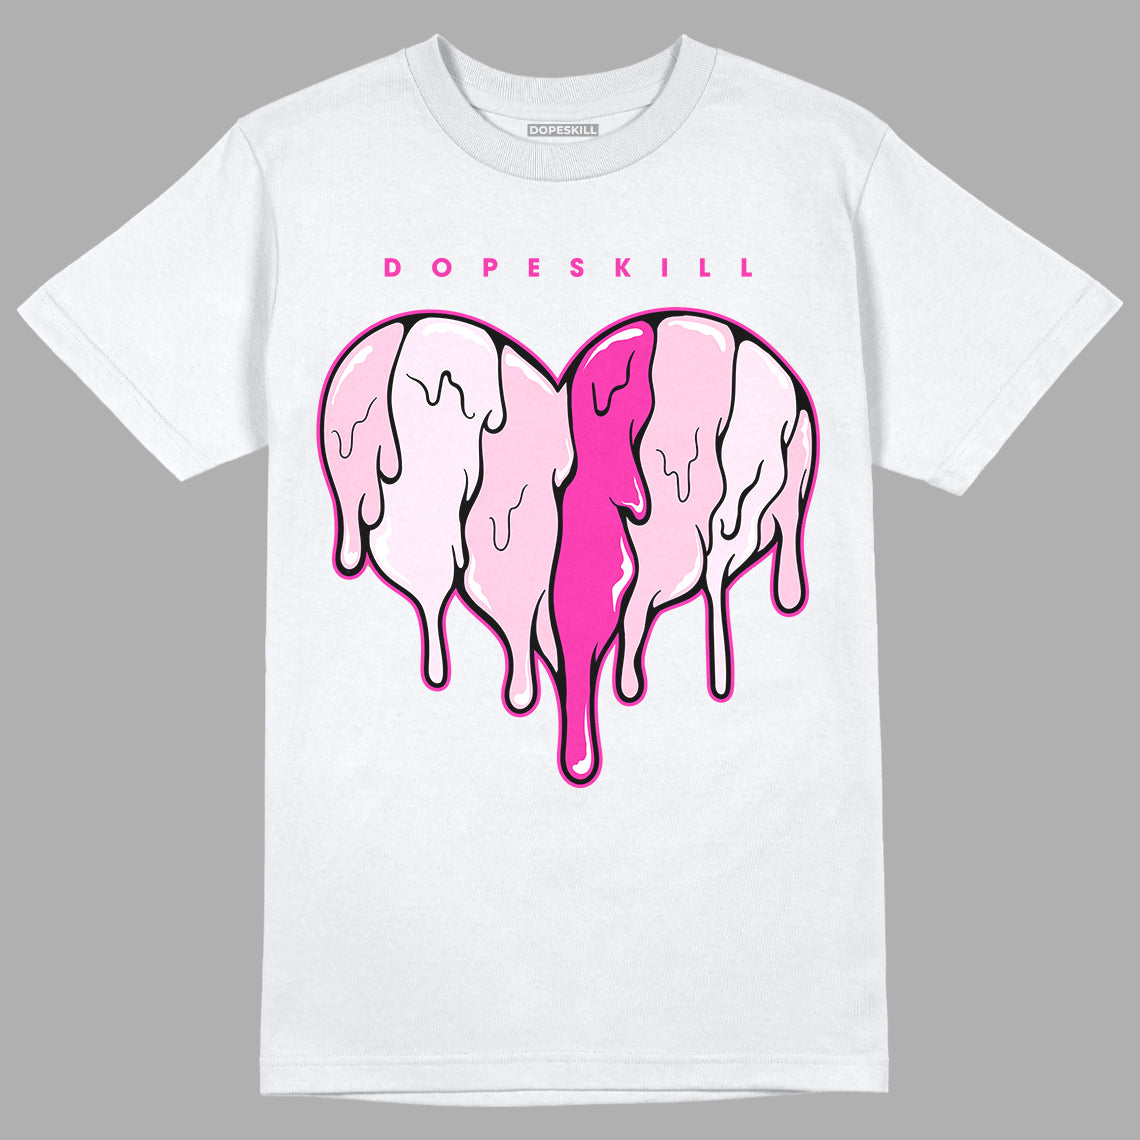 Triple Pink Dunk Low DopeSkill T-Shirt Slime Drip Heart Graphic - White 